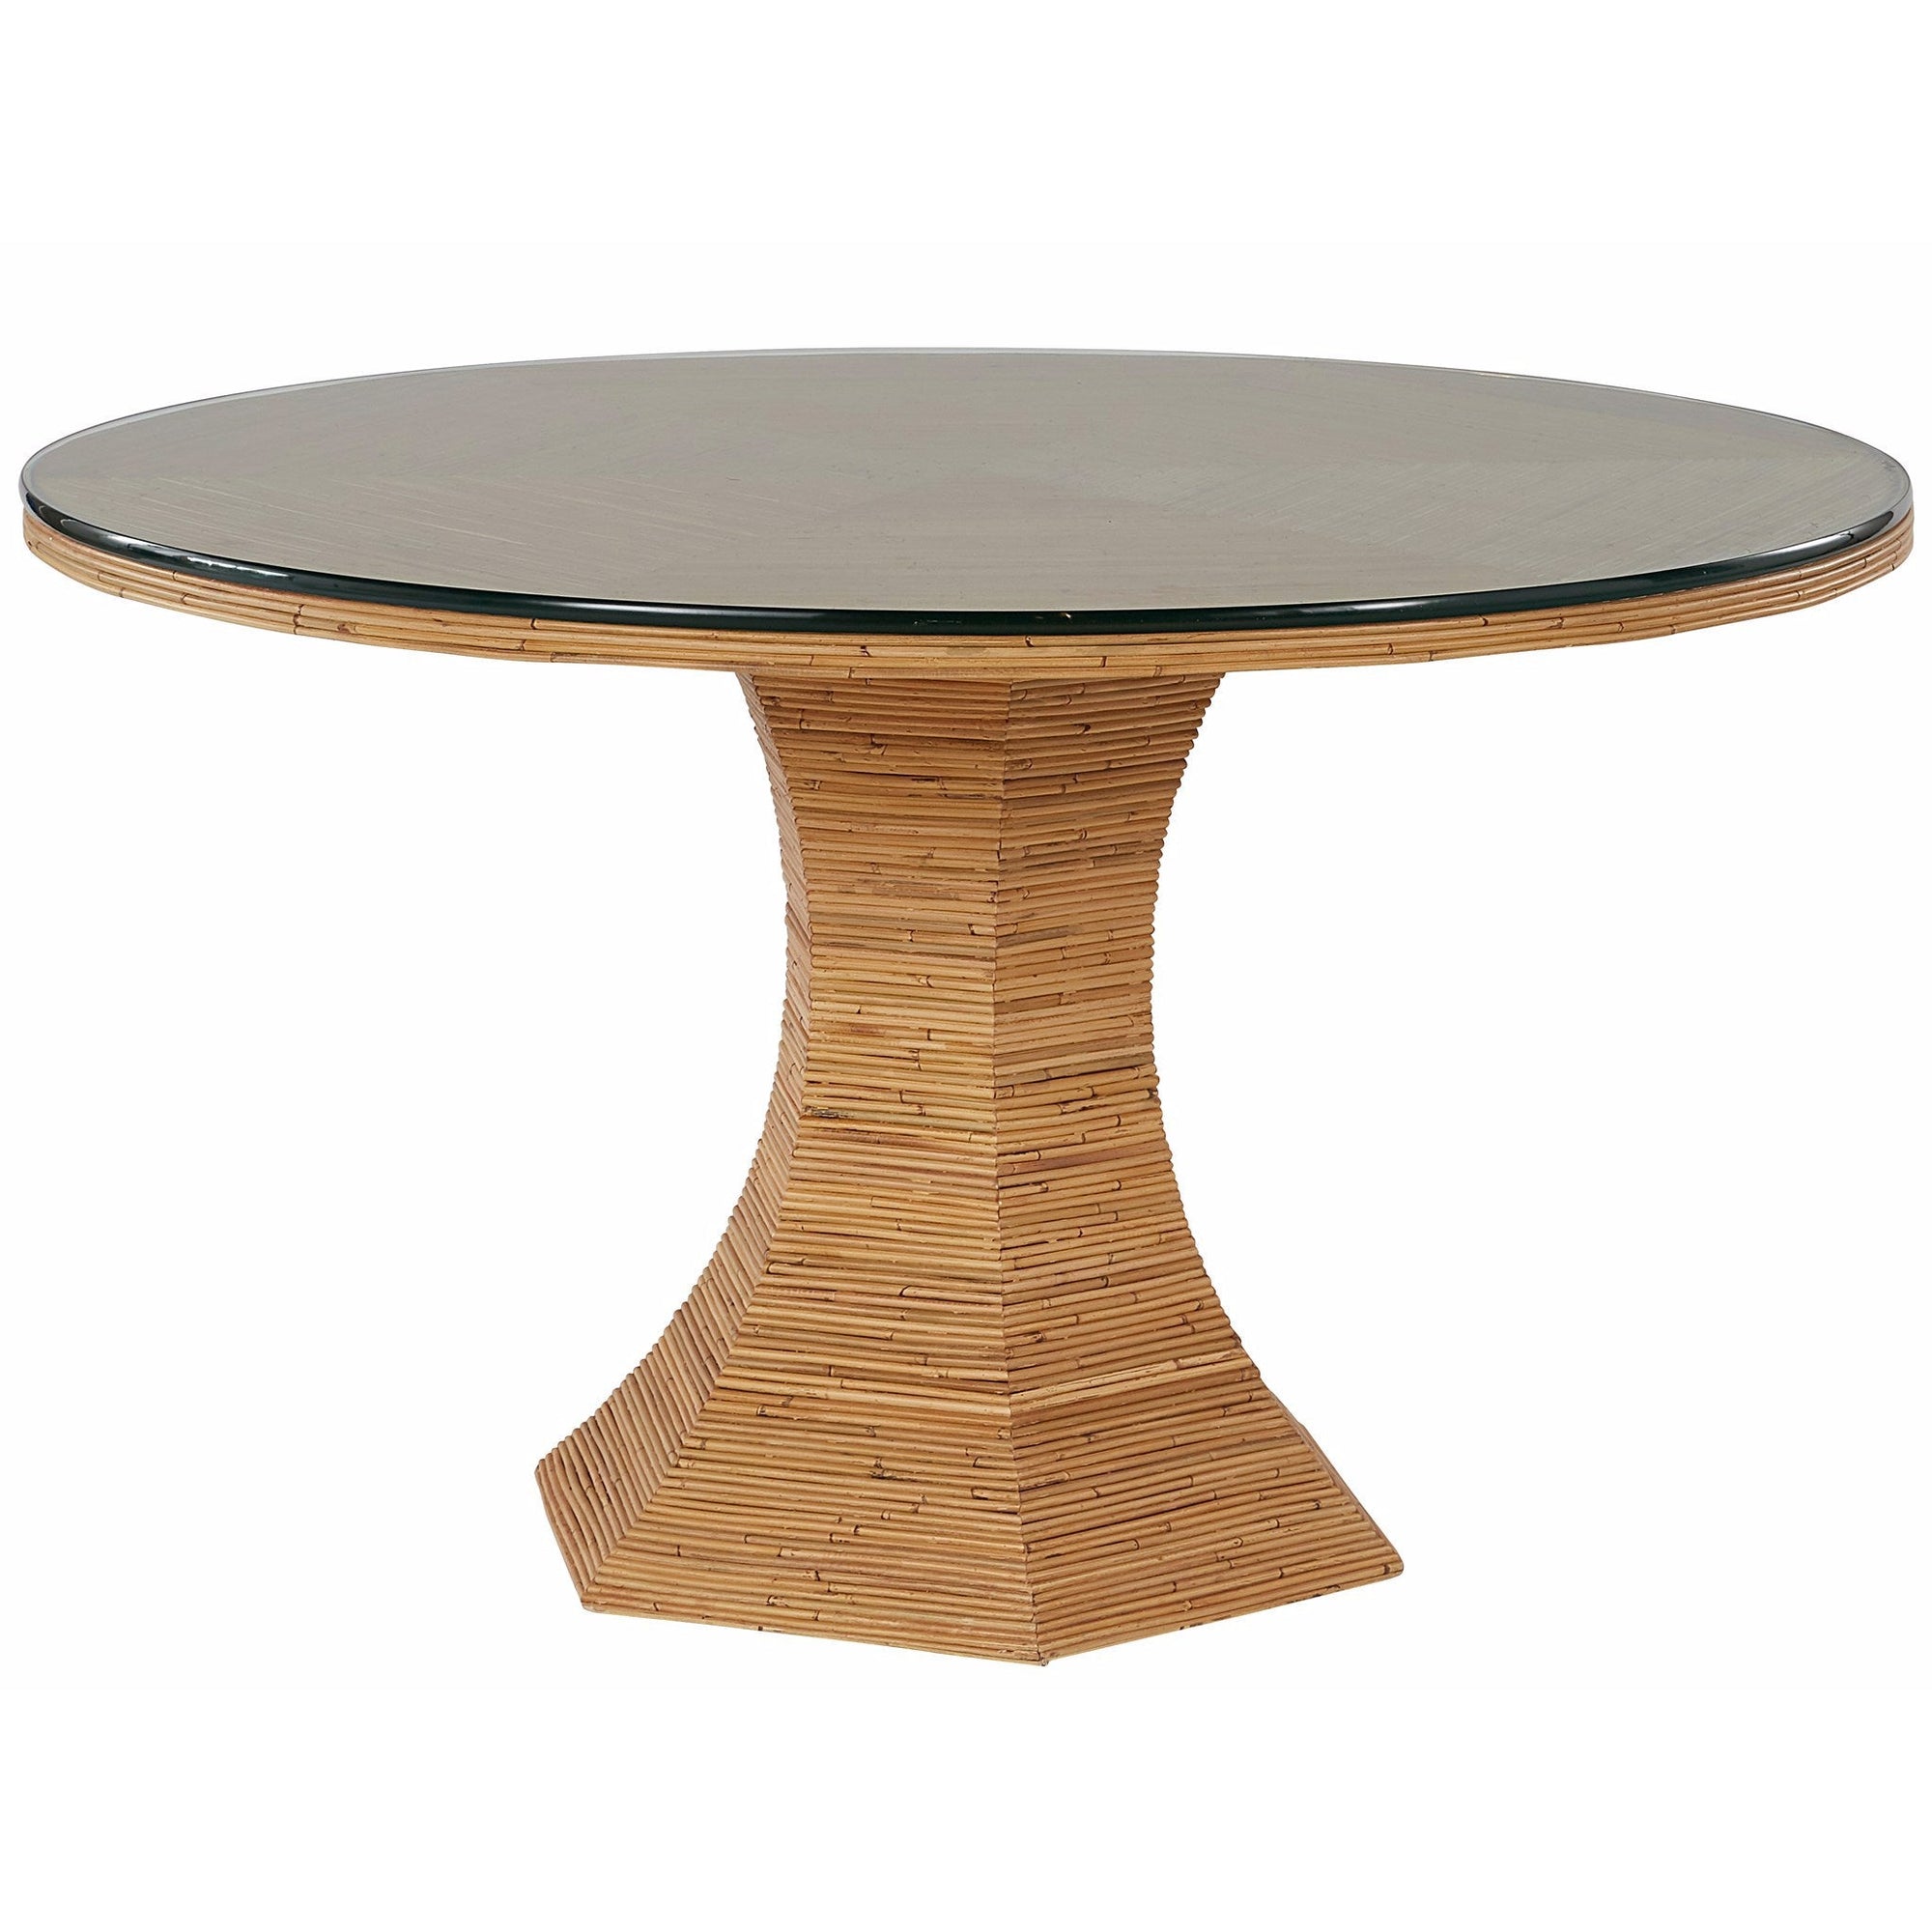 Nantucket Round Dining Table w/Glass Top 54"